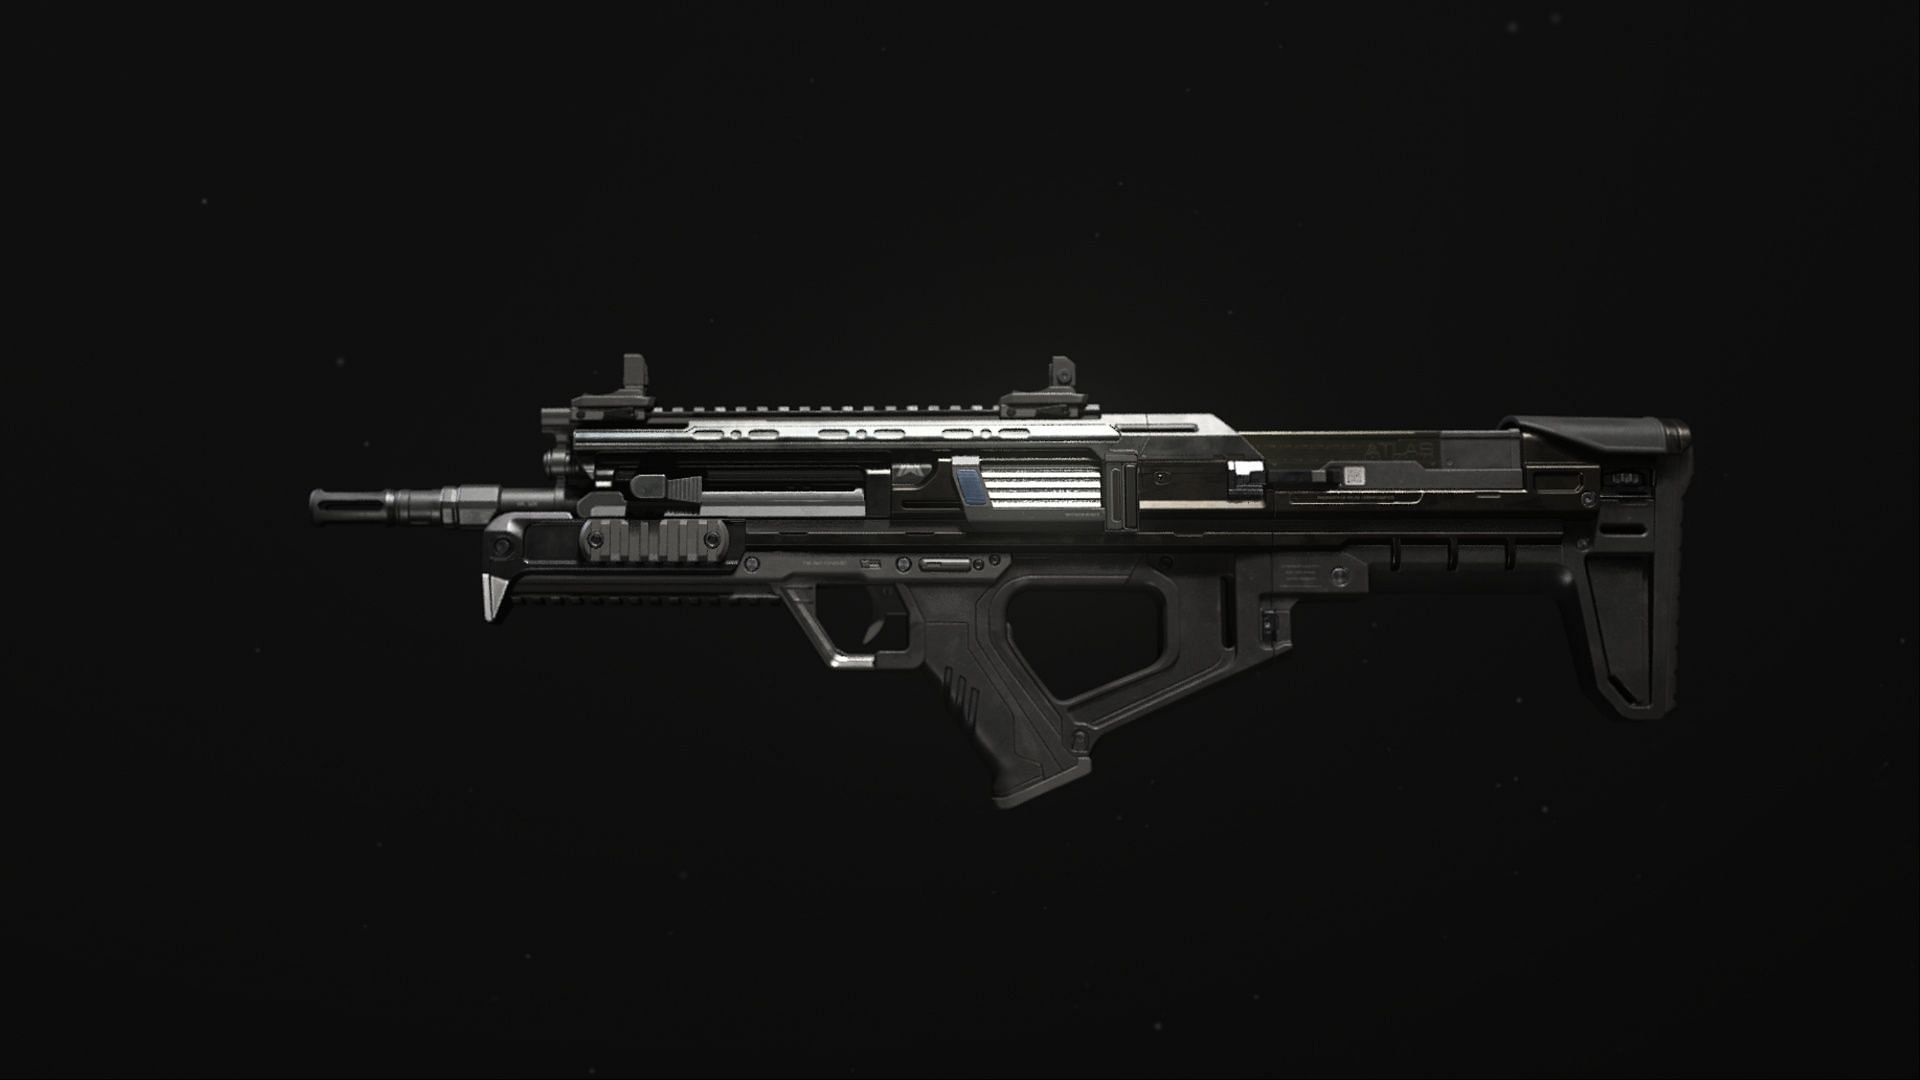 BAL-27 loadout in MW3 and Warzone (Image via Activision)